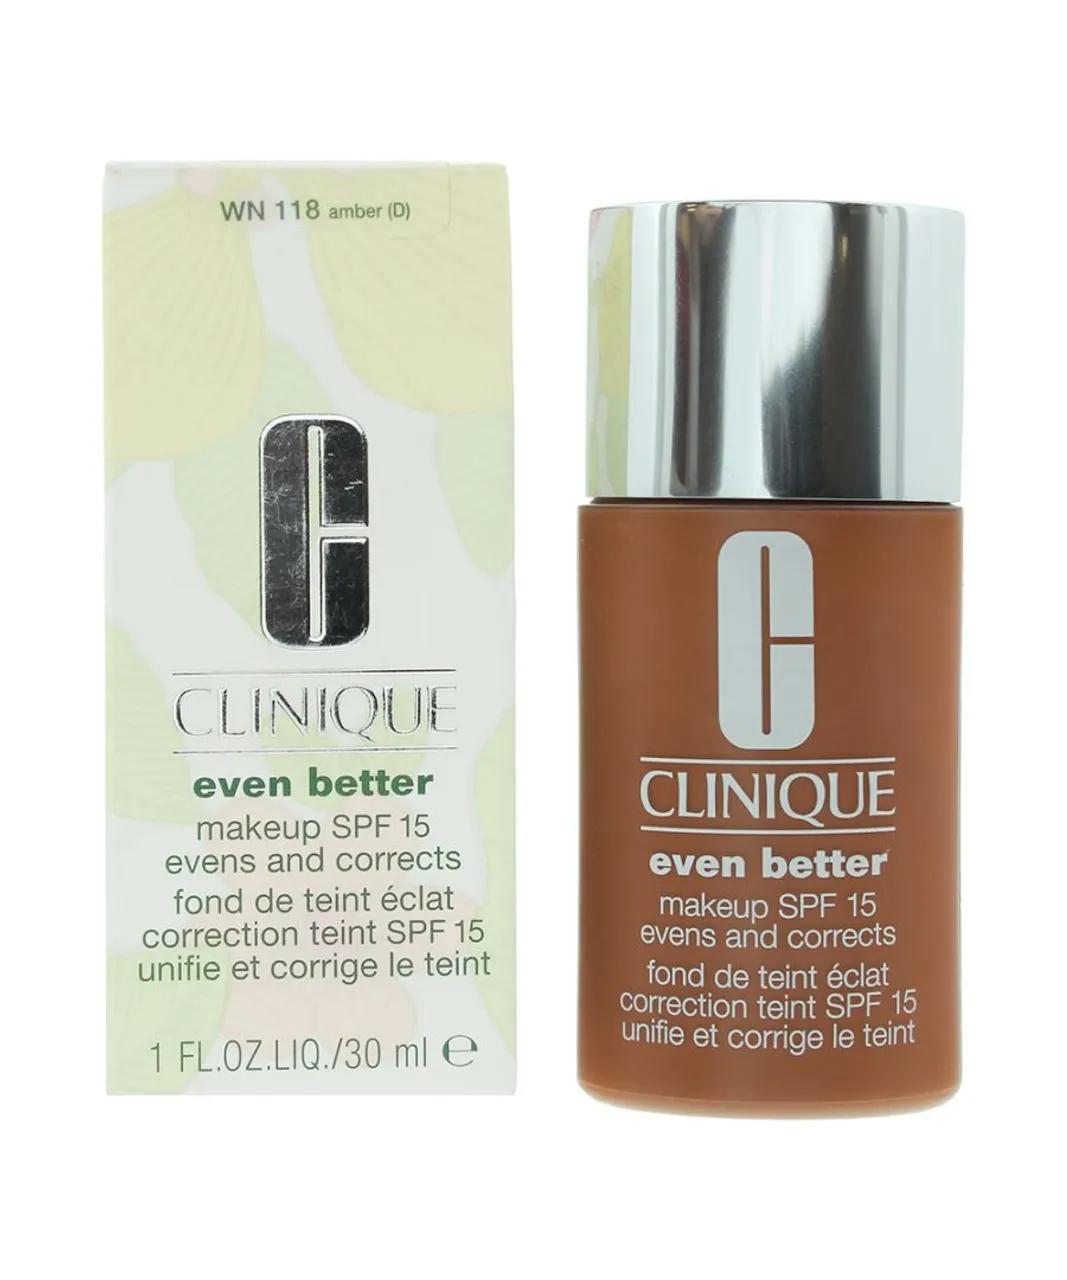 Clinique Womens Even Better Evens & Corrects WN 118 Amber (D) Foundation Spf 15 30ml - NA - One Size